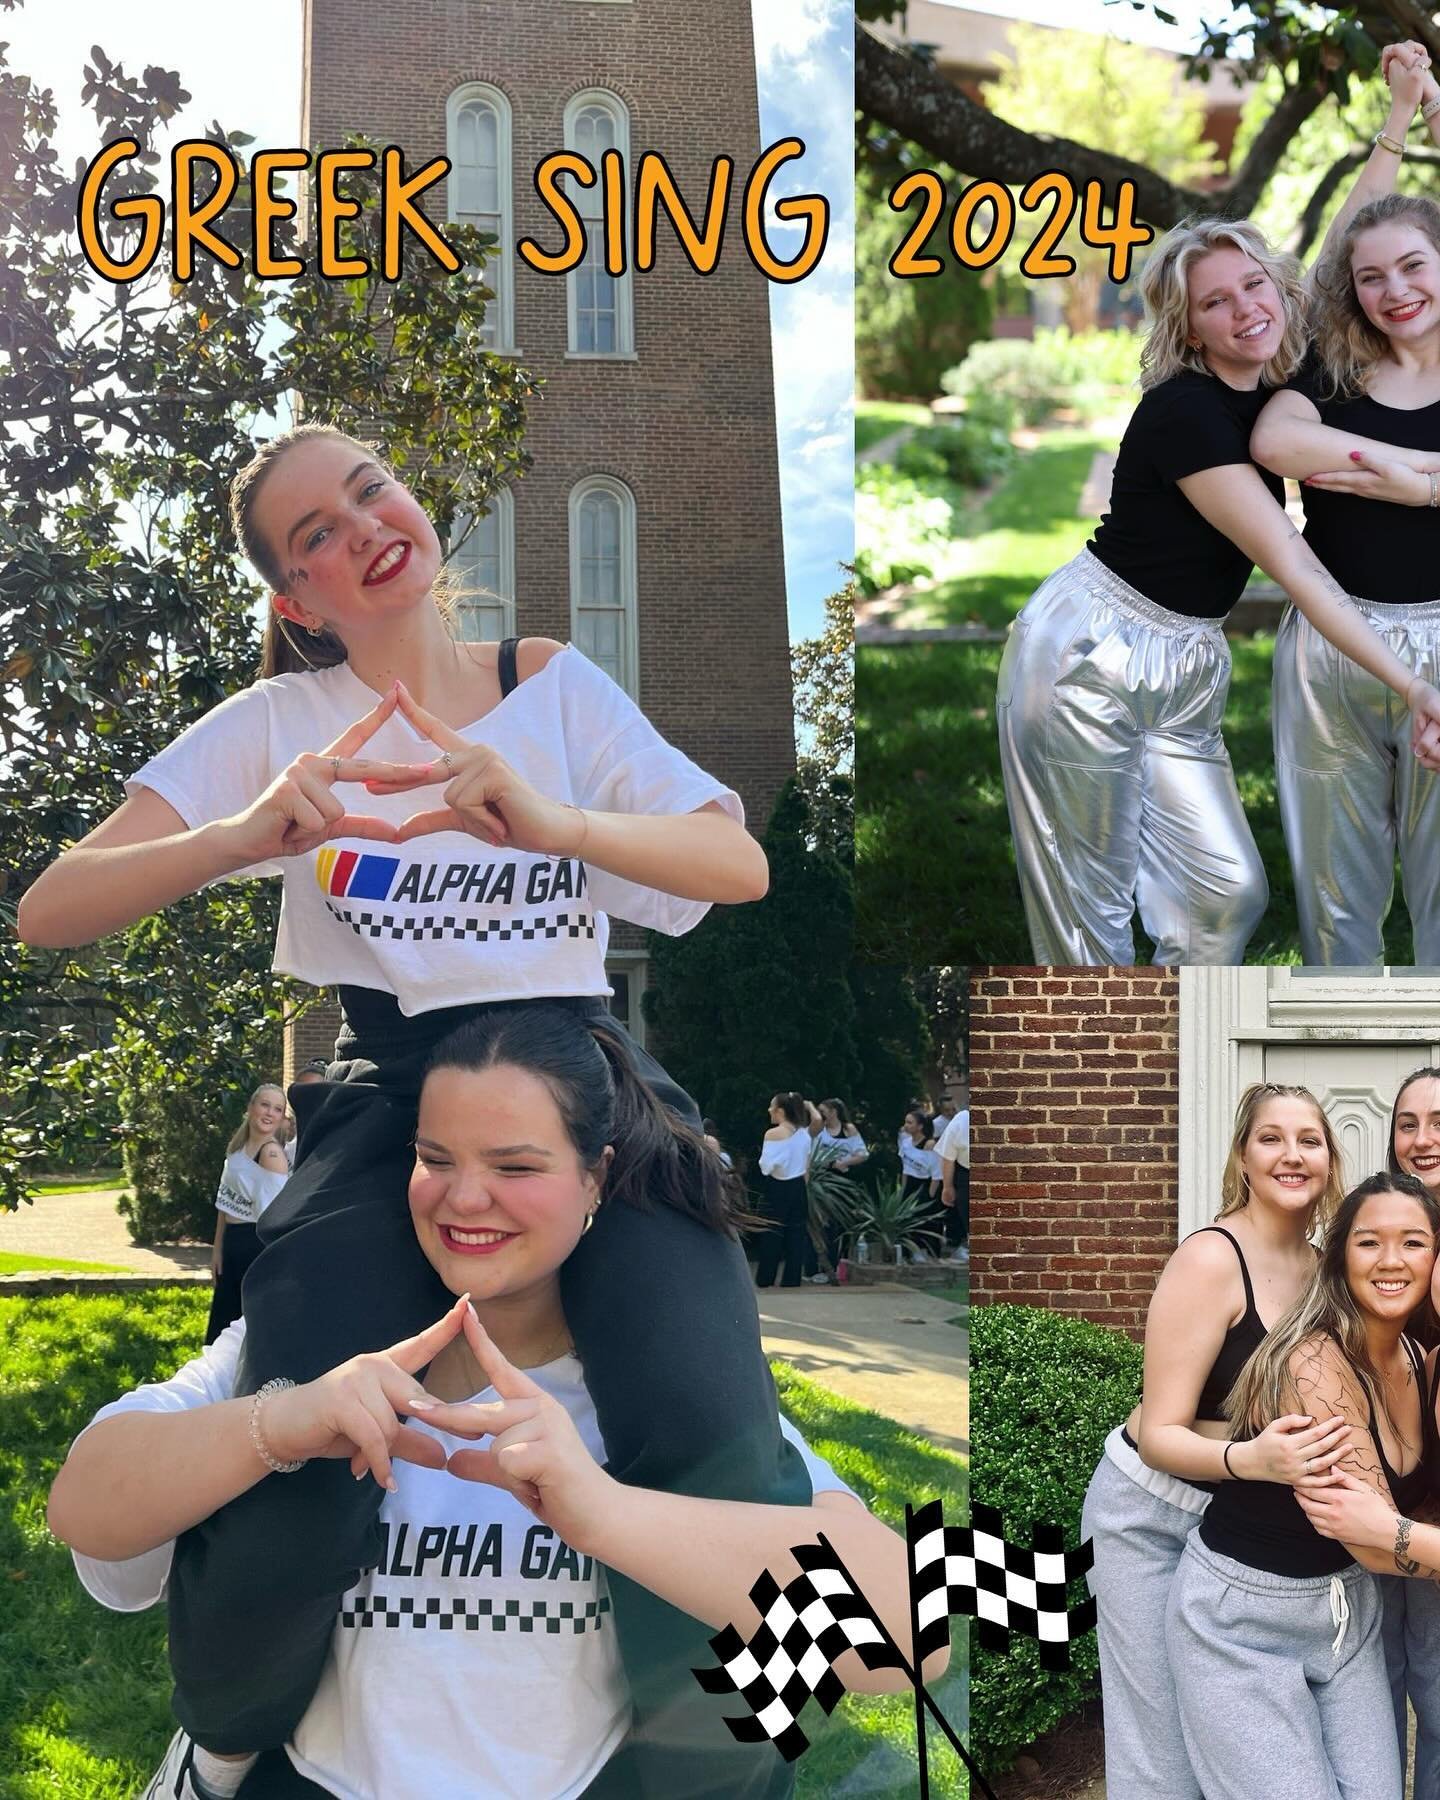 This weekend Panhellenic hosted Greek Sing 2024!!! We raised over 100k for @stjude !!! 

Congratulations to all the chapters and dance teams that put on an incredible show this year! We had such a fun night with y&rsquo;all 🤍

See you next spring! ?